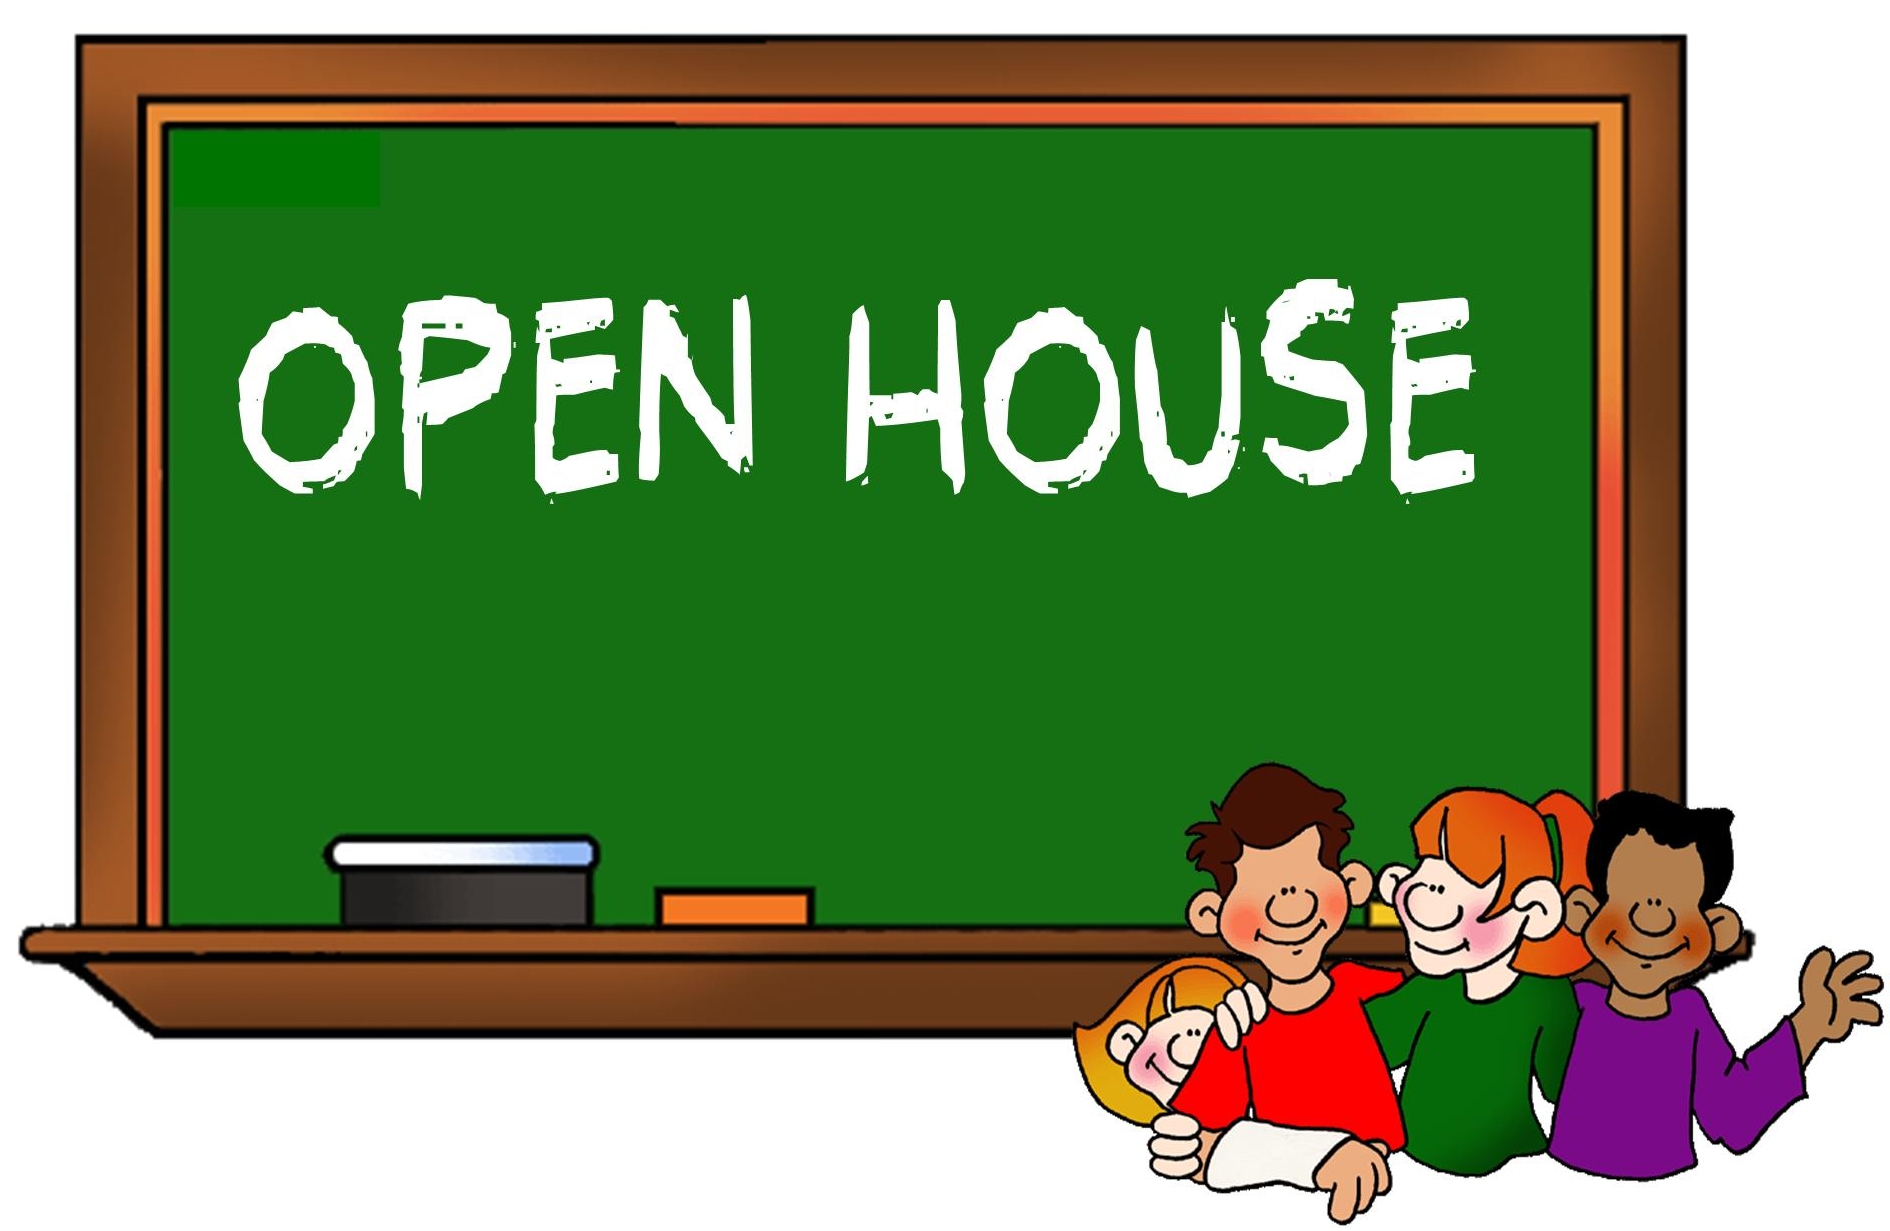 March 6   Hdc Open House 6 30   8 00 Pm For New Students